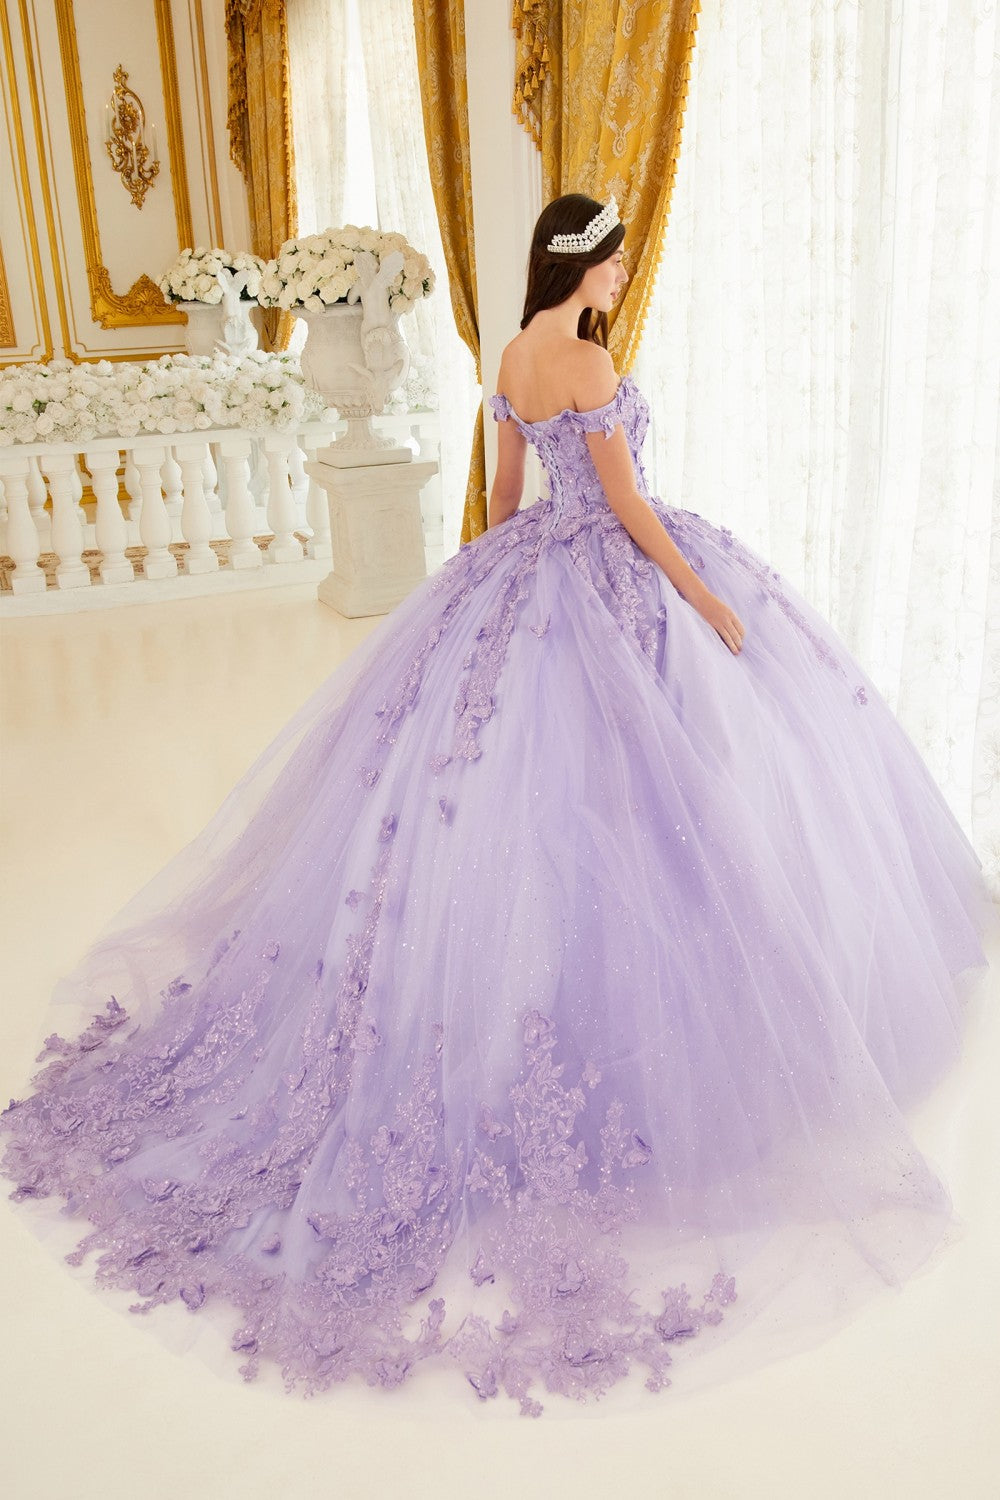 Lavender_1 Layered Tulle Sweetheart Neckline Quinceanera Ball Gown 15709